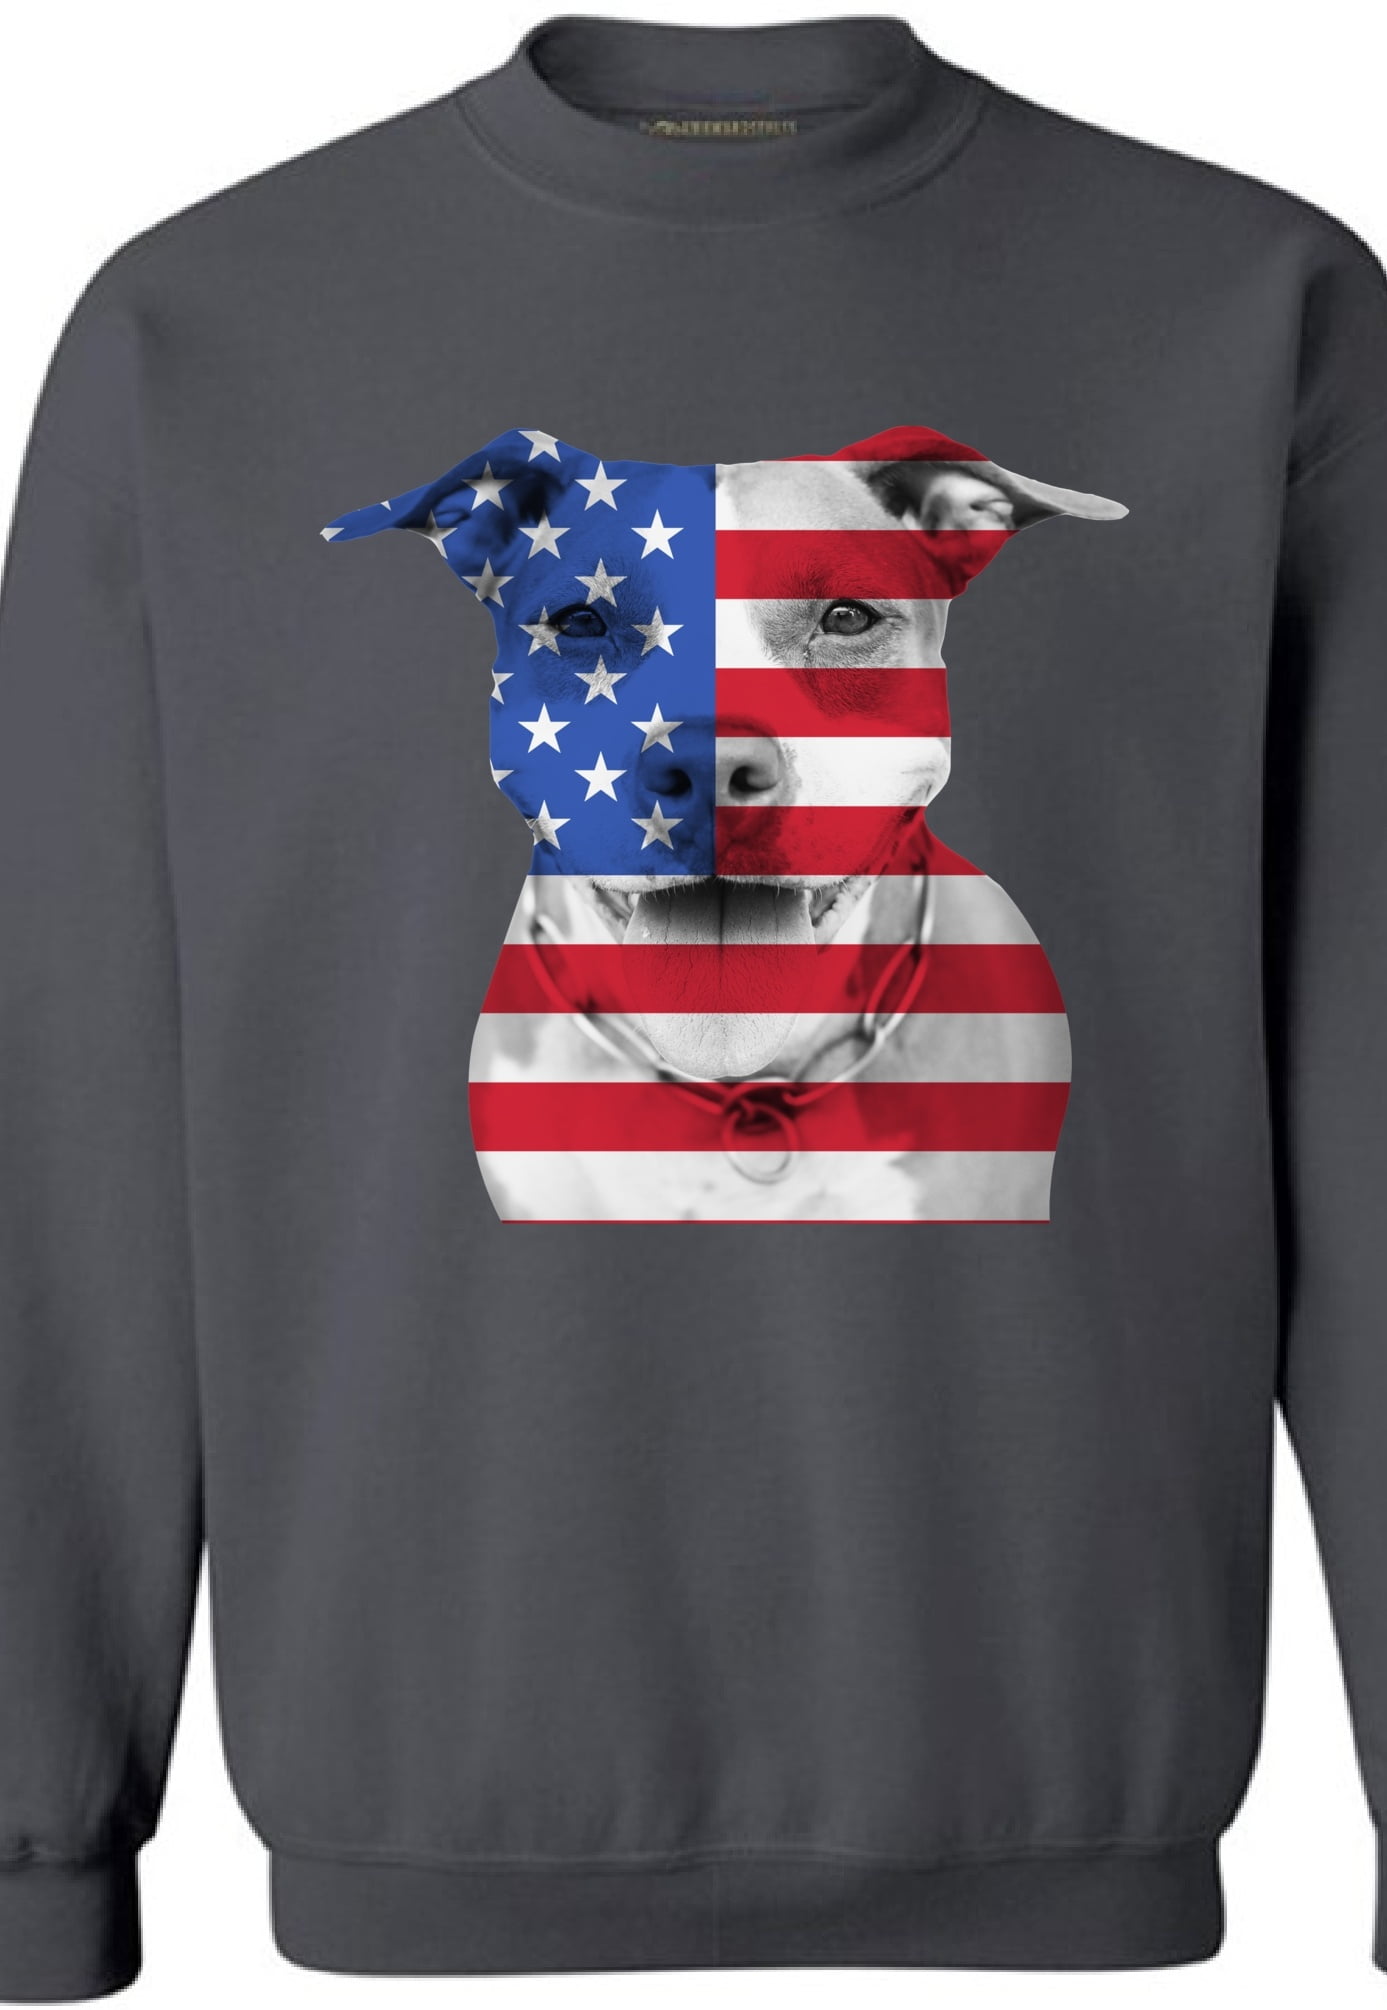 new American Flag hoodie 4th of july T-shirt US flag independence day USA